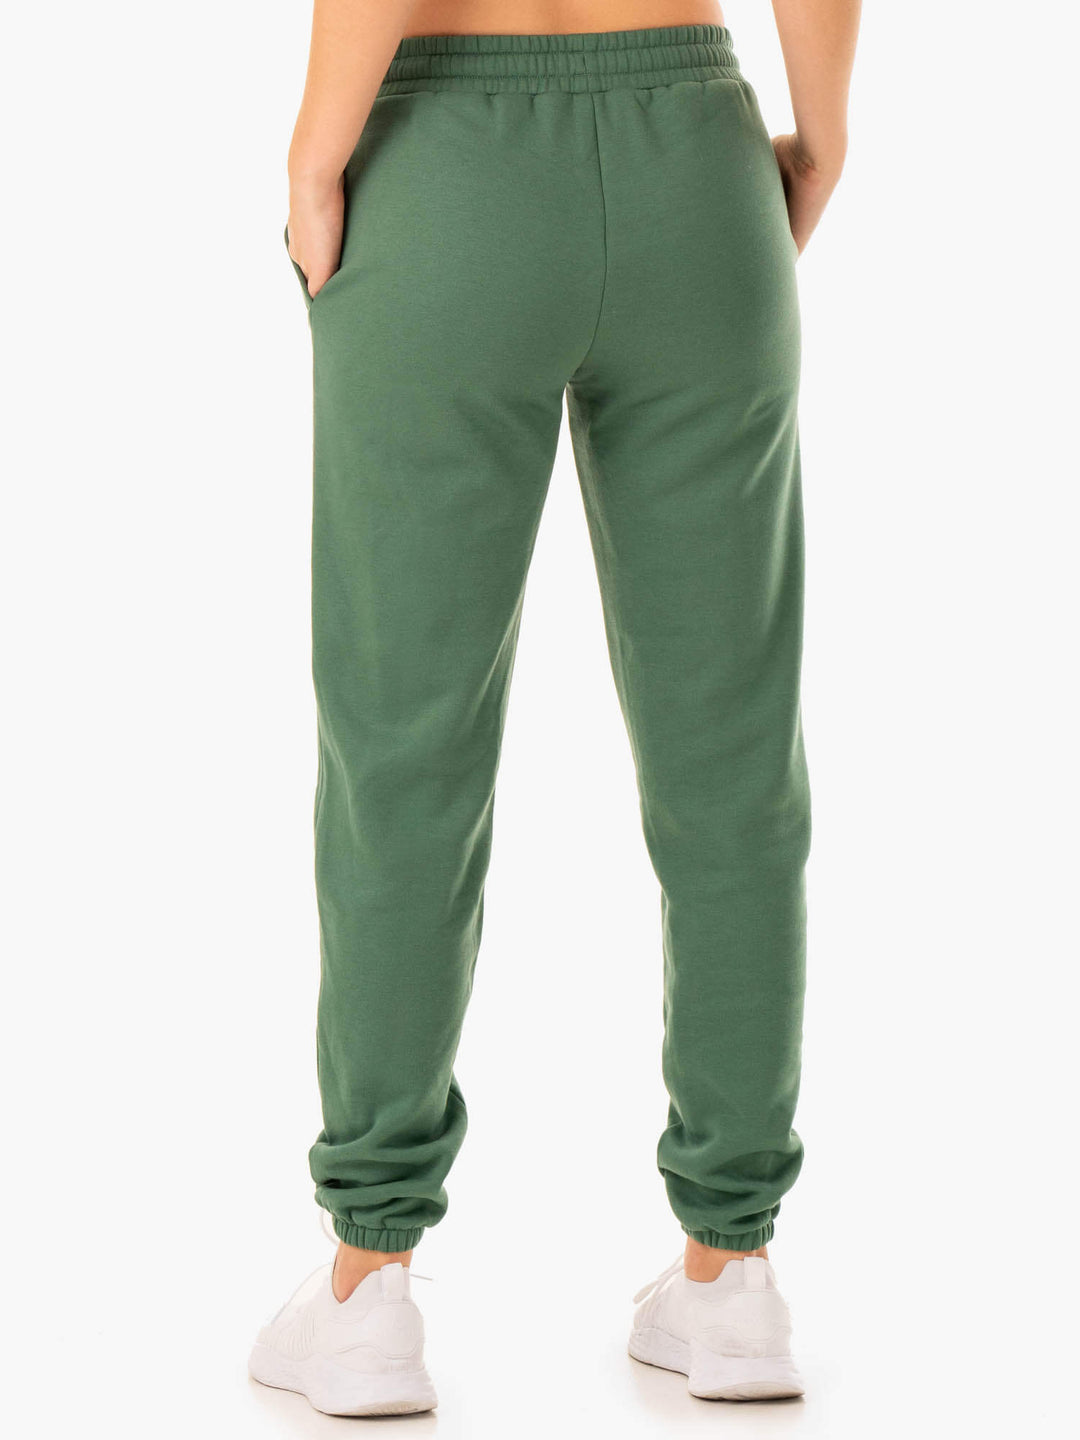 Unisex Track Pants - Forest Green Clothing Ryderwear 